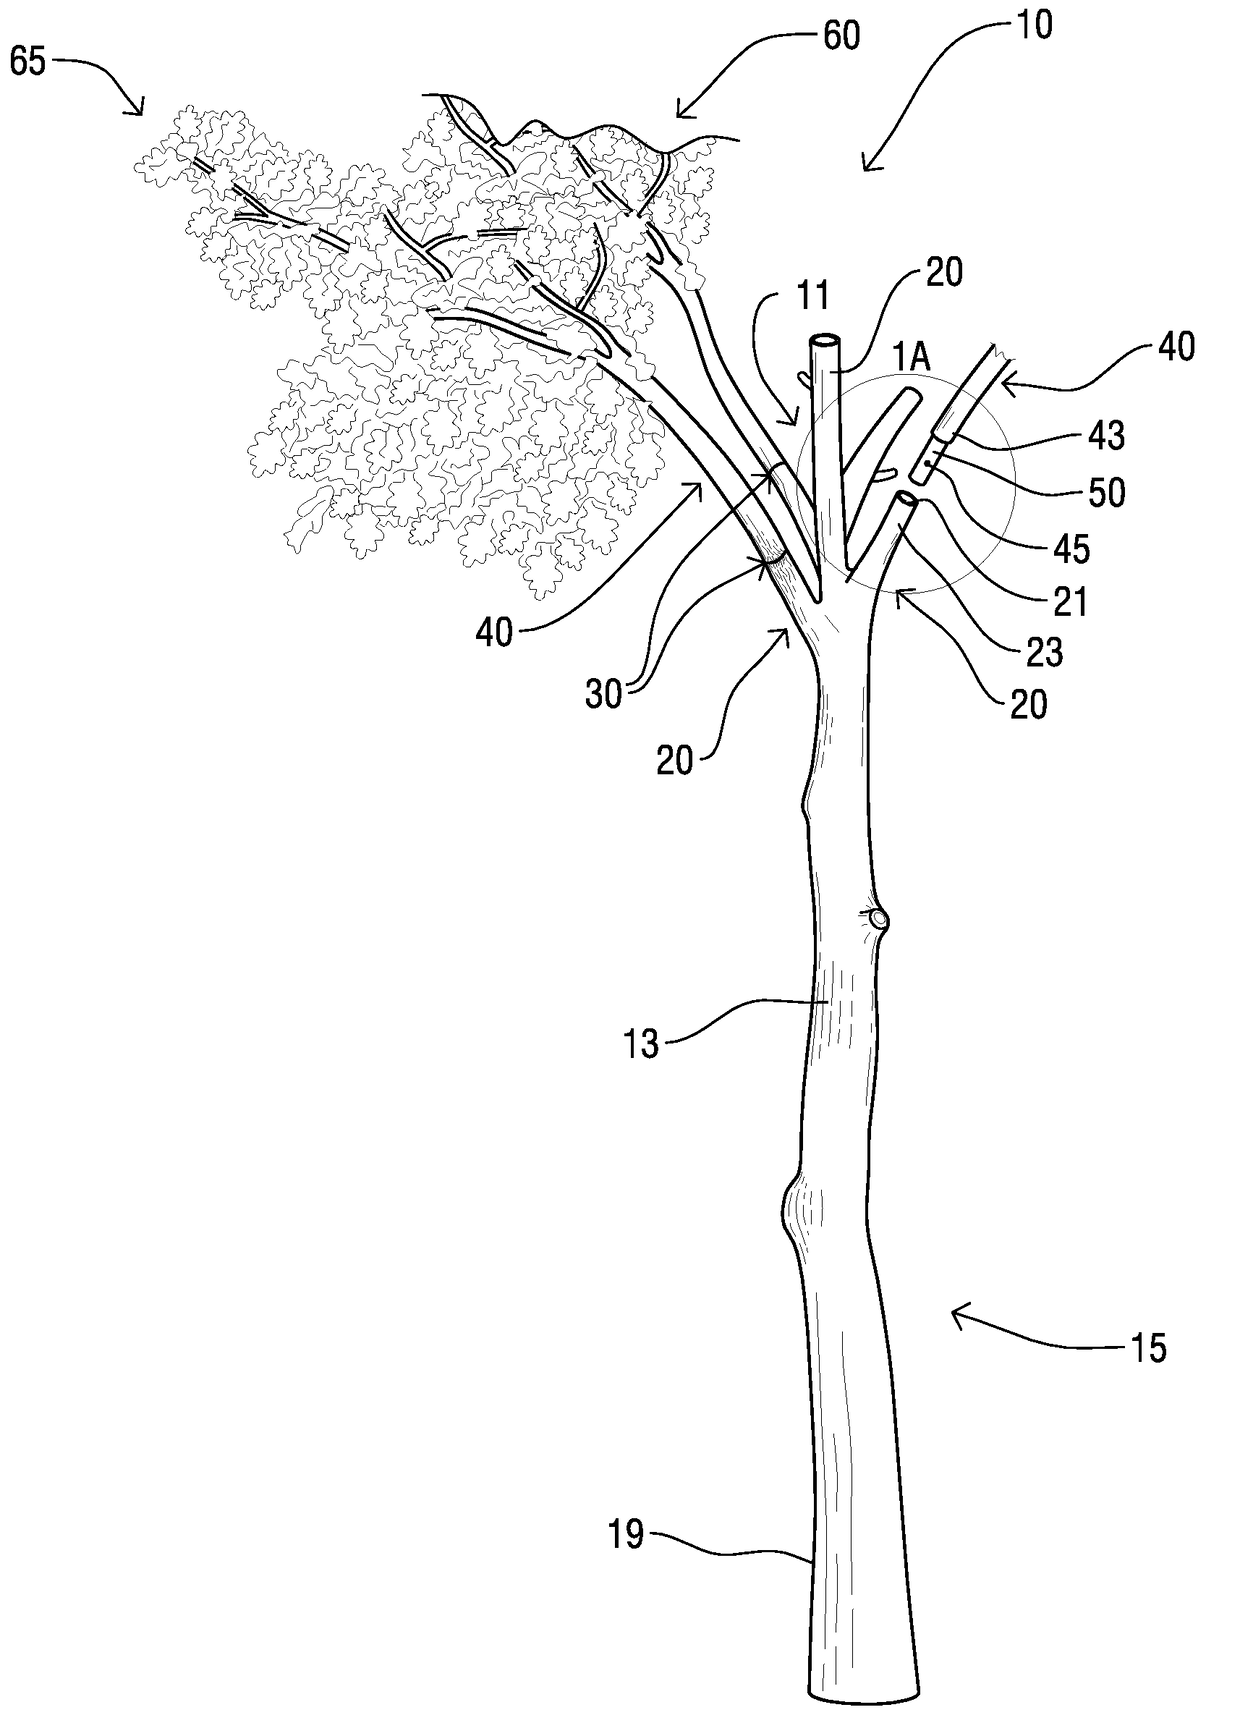 Decorative Tree with Insertable, Interchangeable Branches System and Method